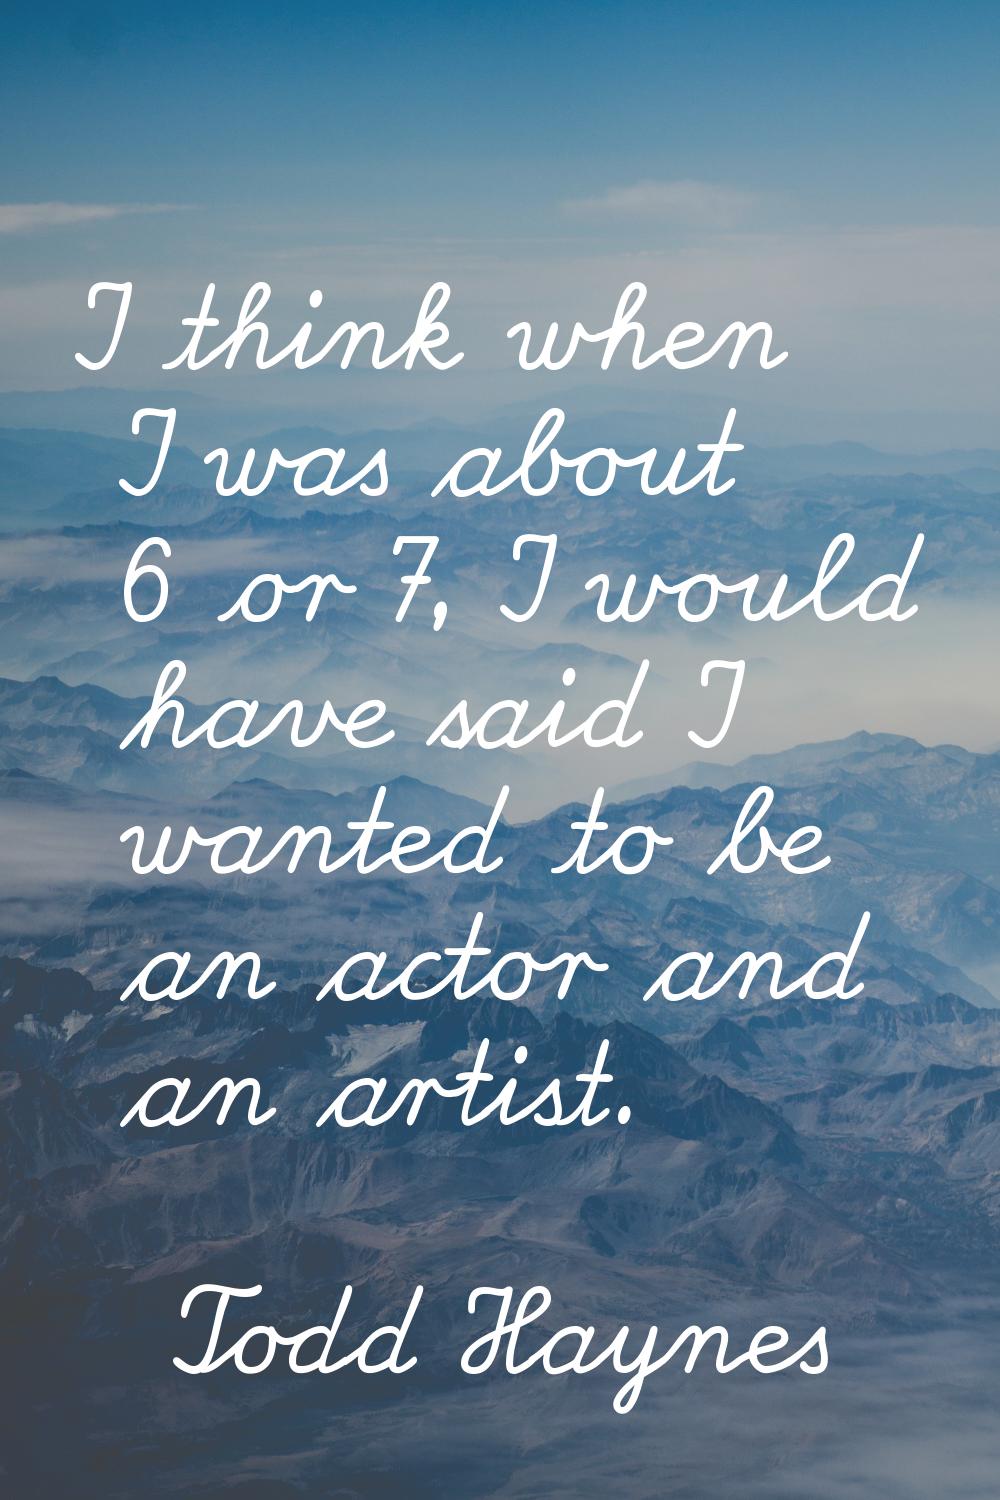 I think when I was about 6 or 7, I would have said I wanted to be an actor and an artist.